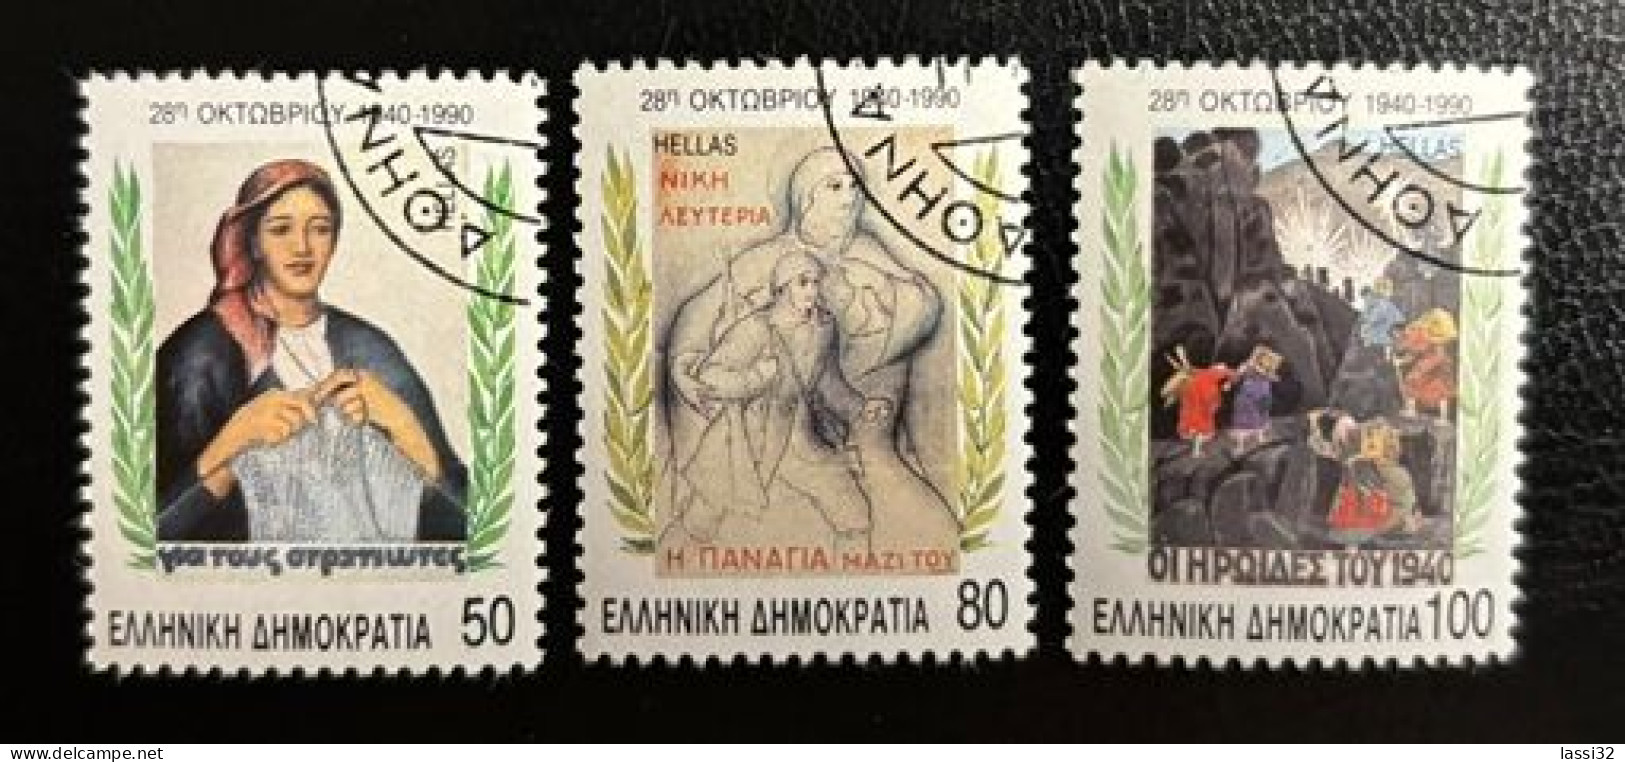 GREECE,1990. 50th ANNIVERSARY OF "NO" OCTOBER 28th 1940, USED - Usados